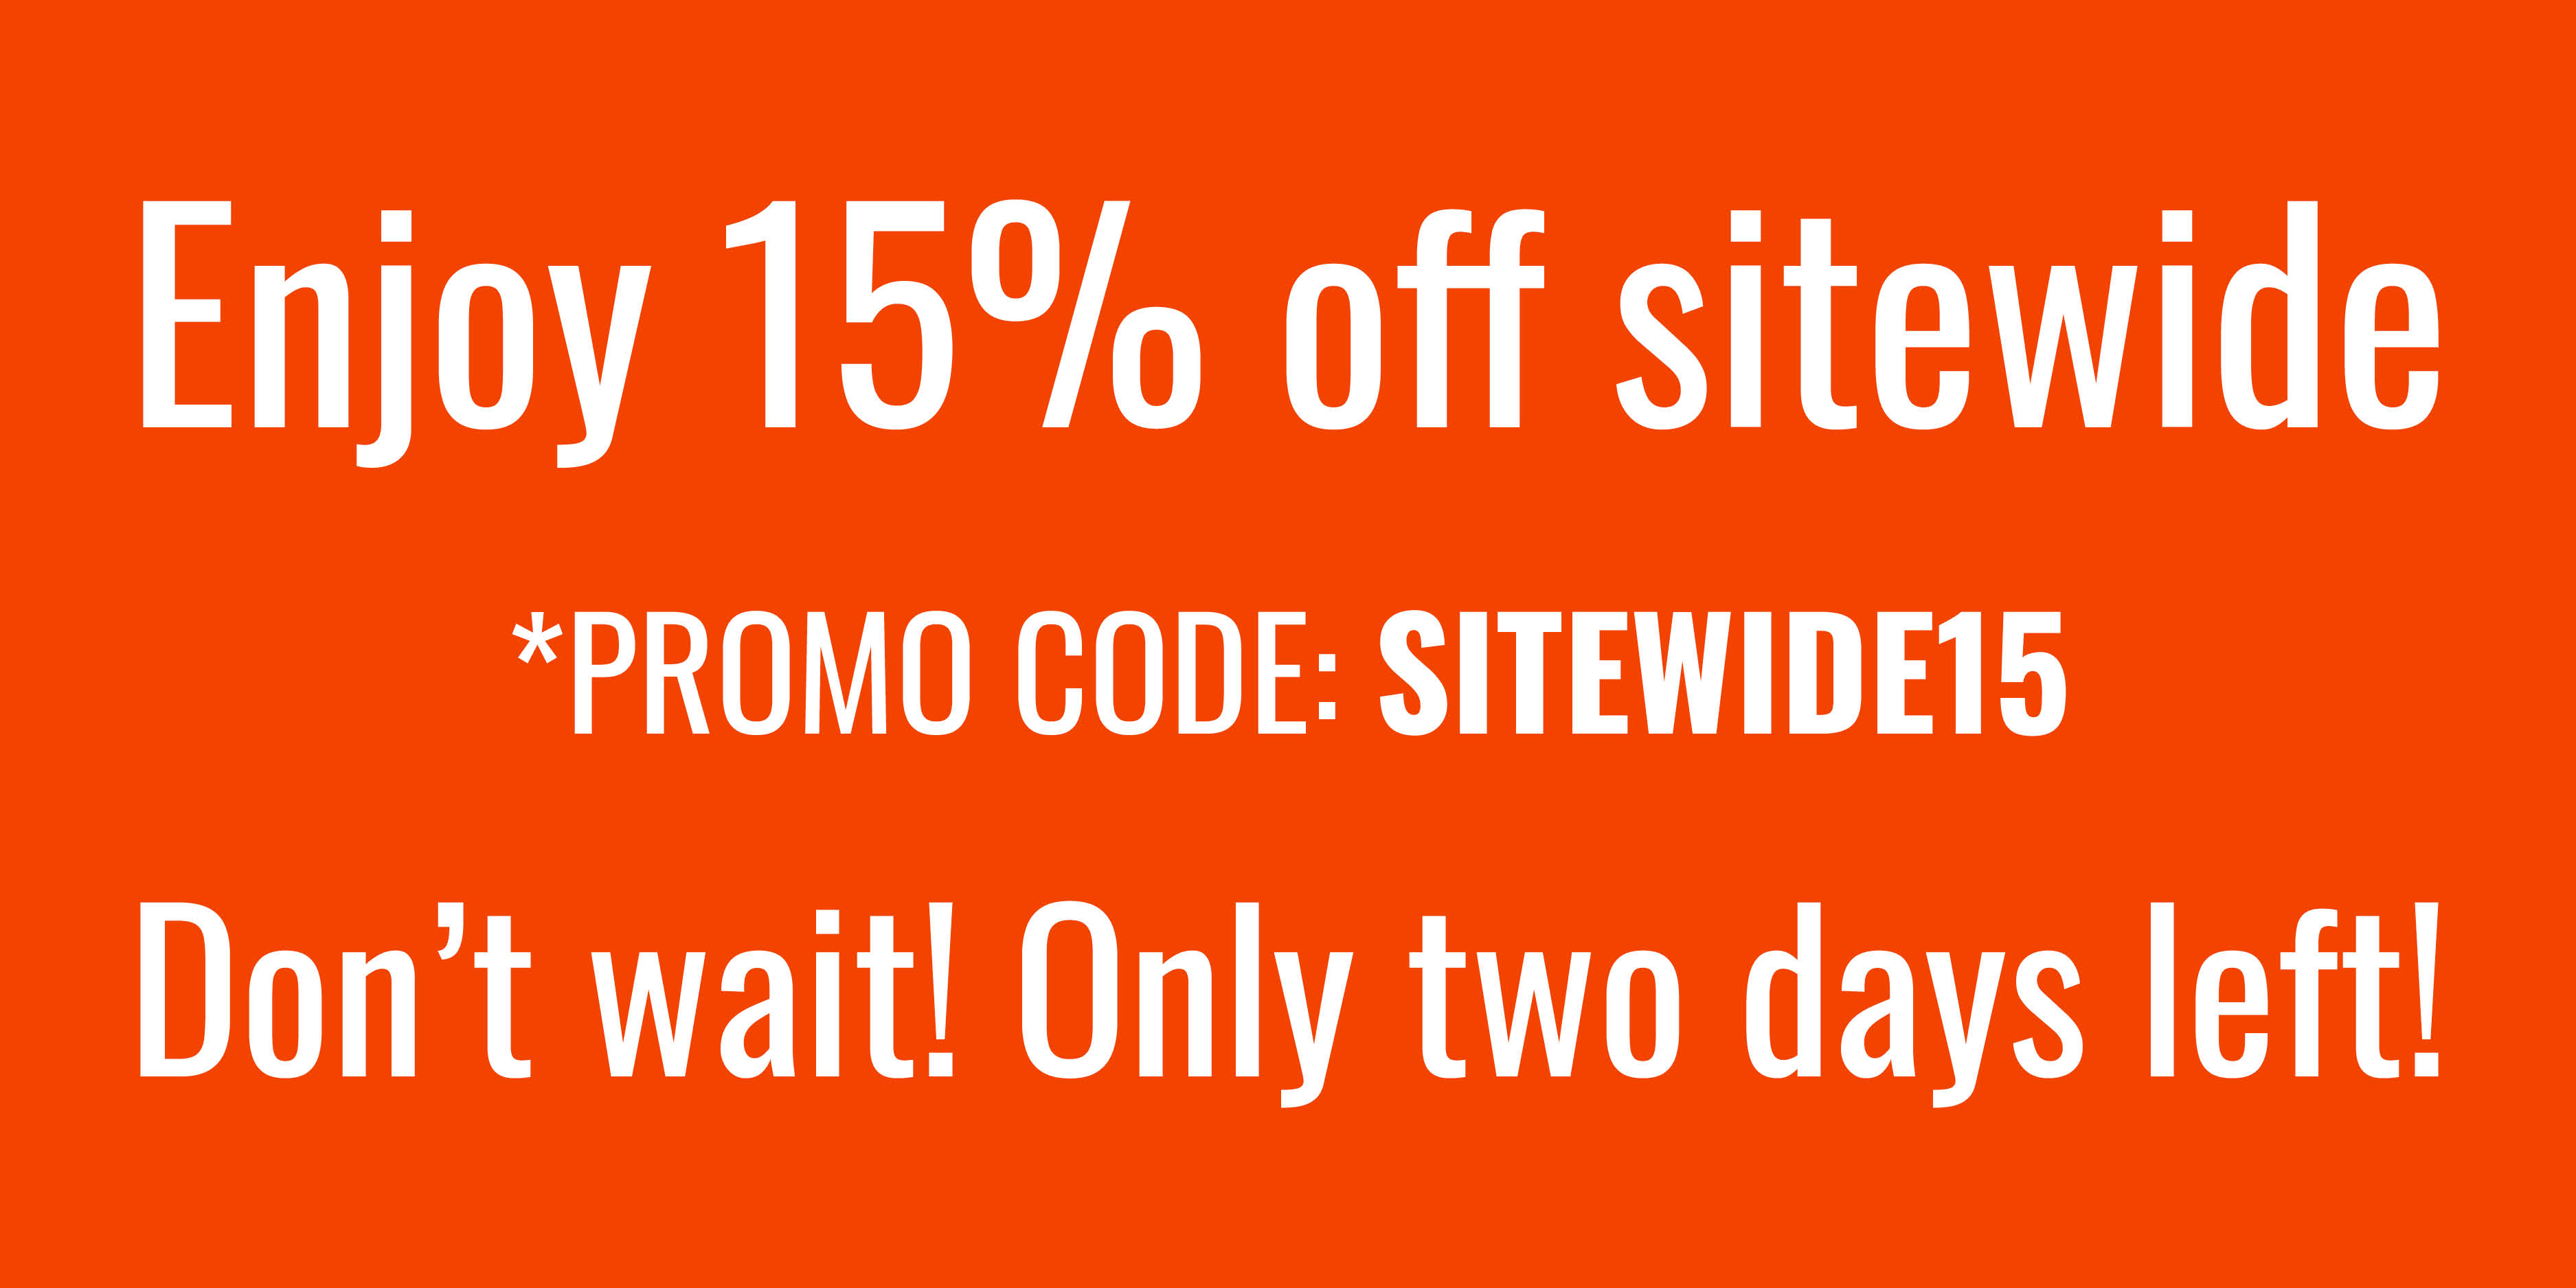 Enjoy 15% off sitewide *PROMO CODE: SITEWIDE15 Don't wait! Only two days left!